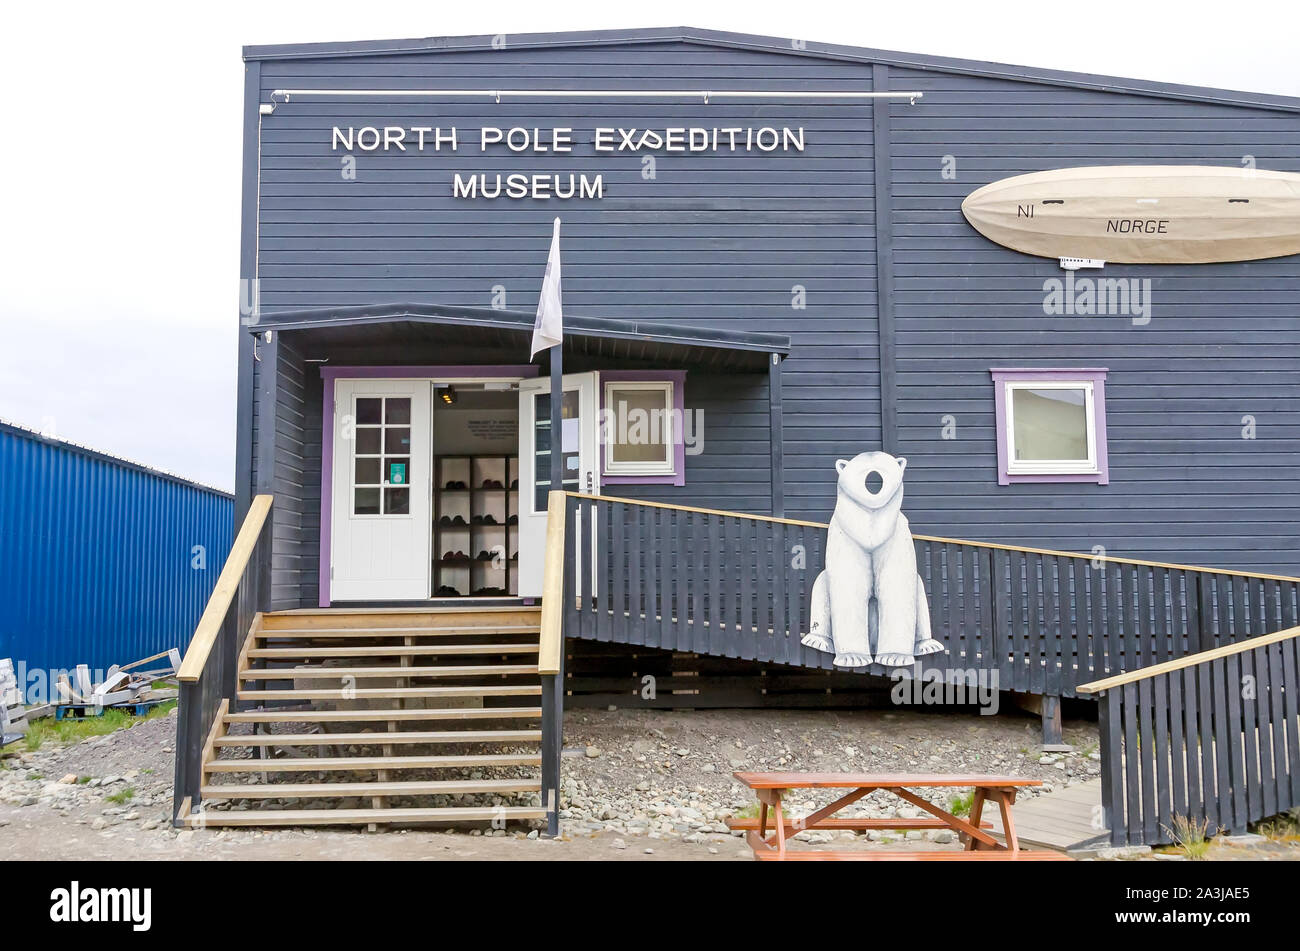 North Pole Expedition Museum, Longeyearbyen, Svalbard, Norway, world's northern-most settlement Stock Photo